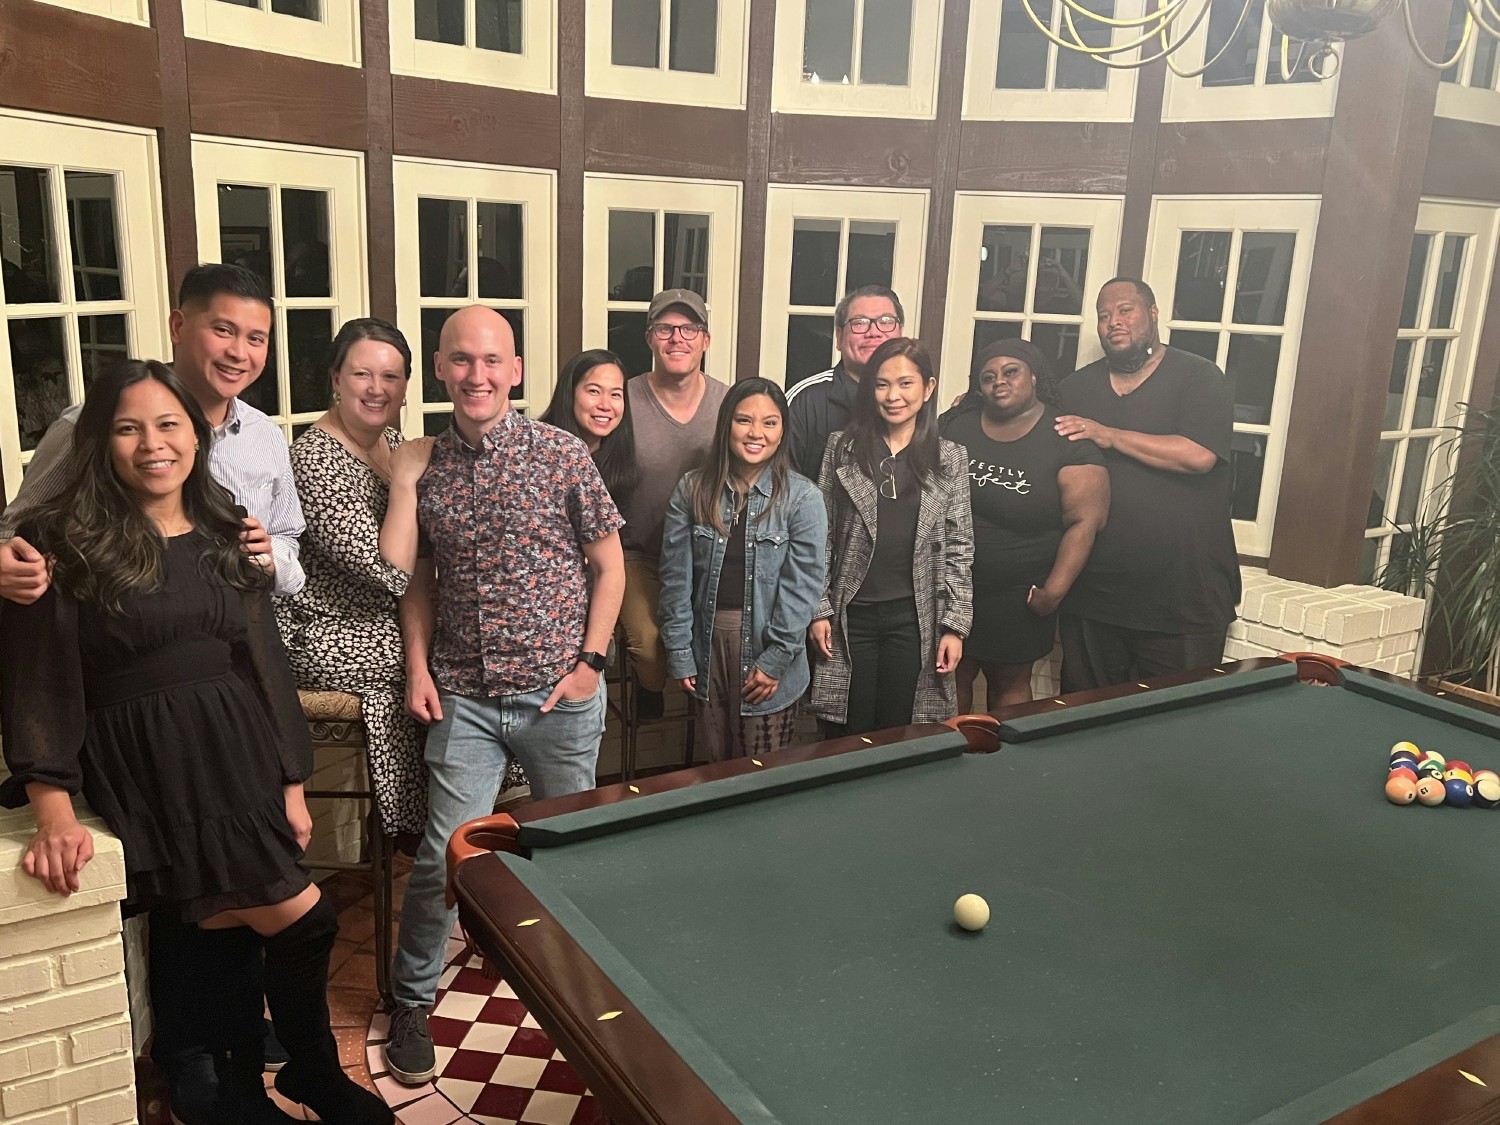 The MPAC California team gathers together in Palm Desert for team bonding - games, dinner, and a little conversation.